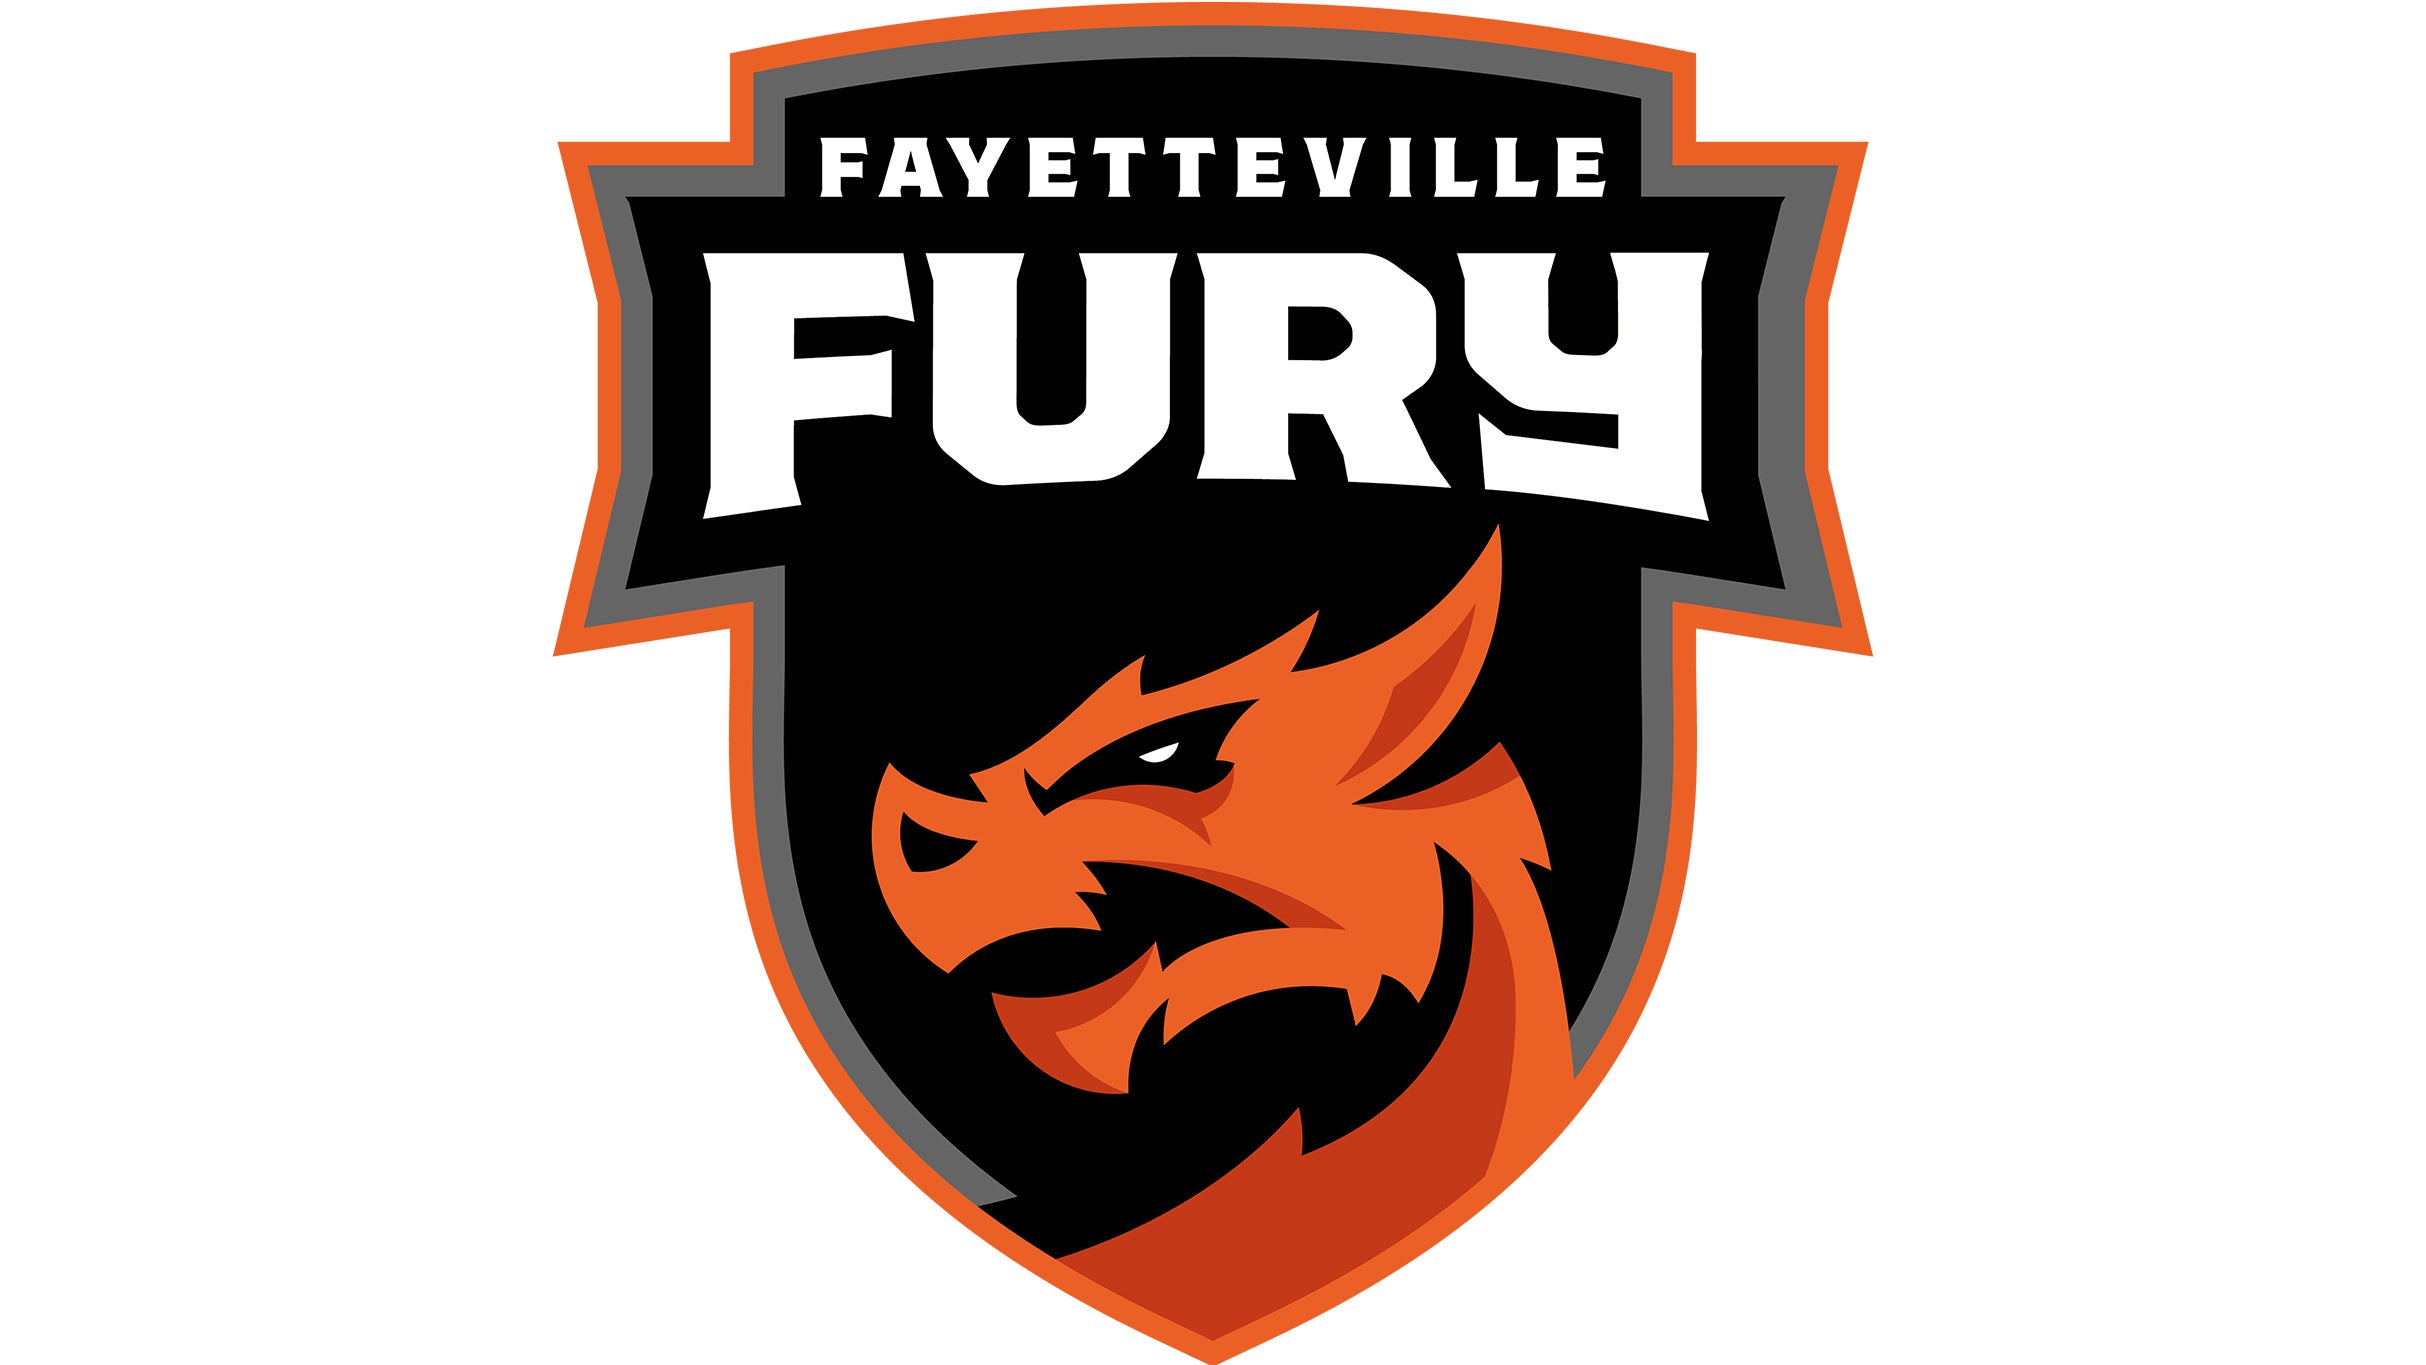 Fayetteville Fury vs. Albany Aces at Crown Coliseum